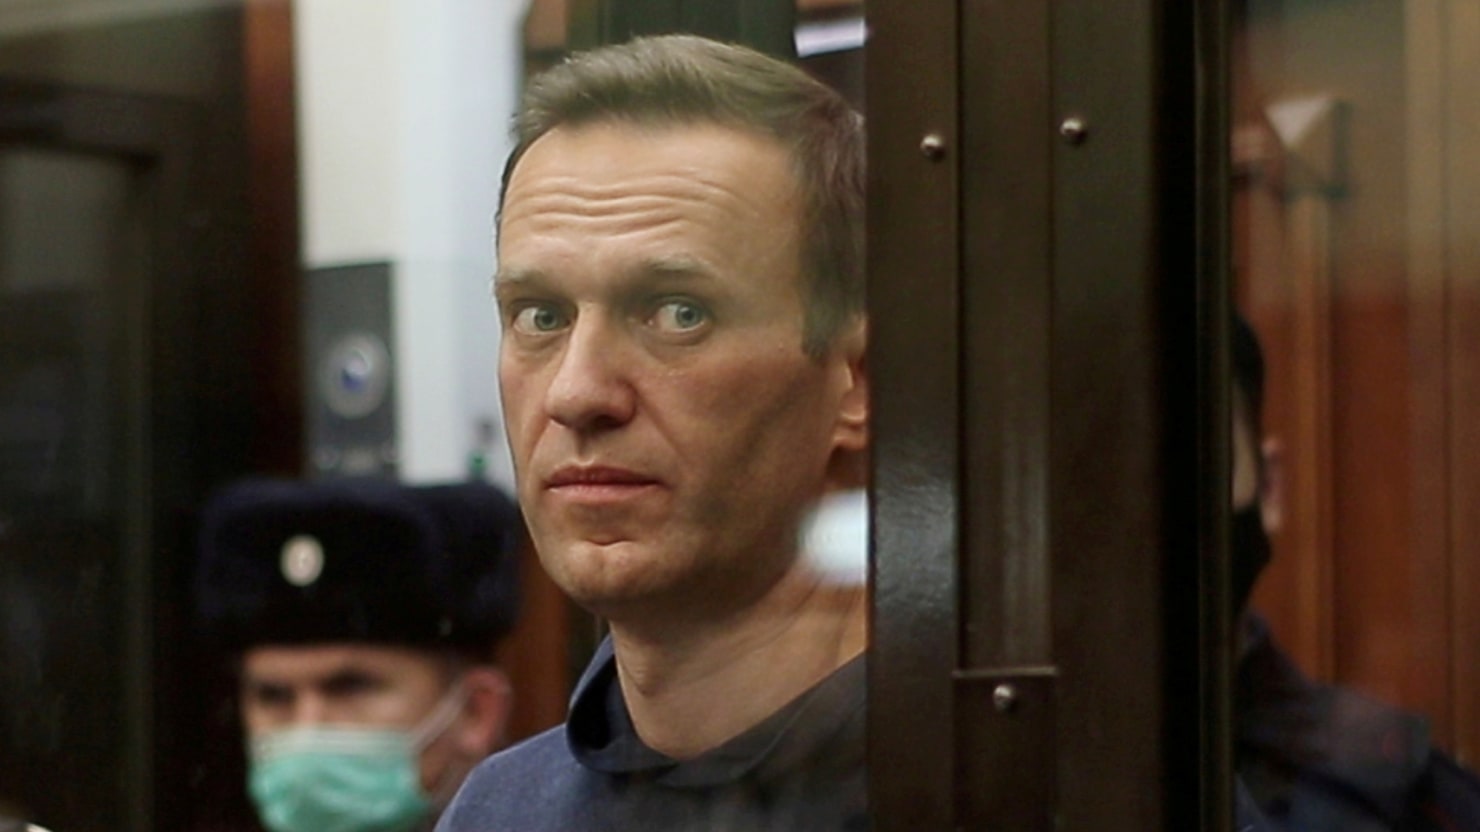 Russian opposition leader Alexei Navalny sent to notorious prison camp